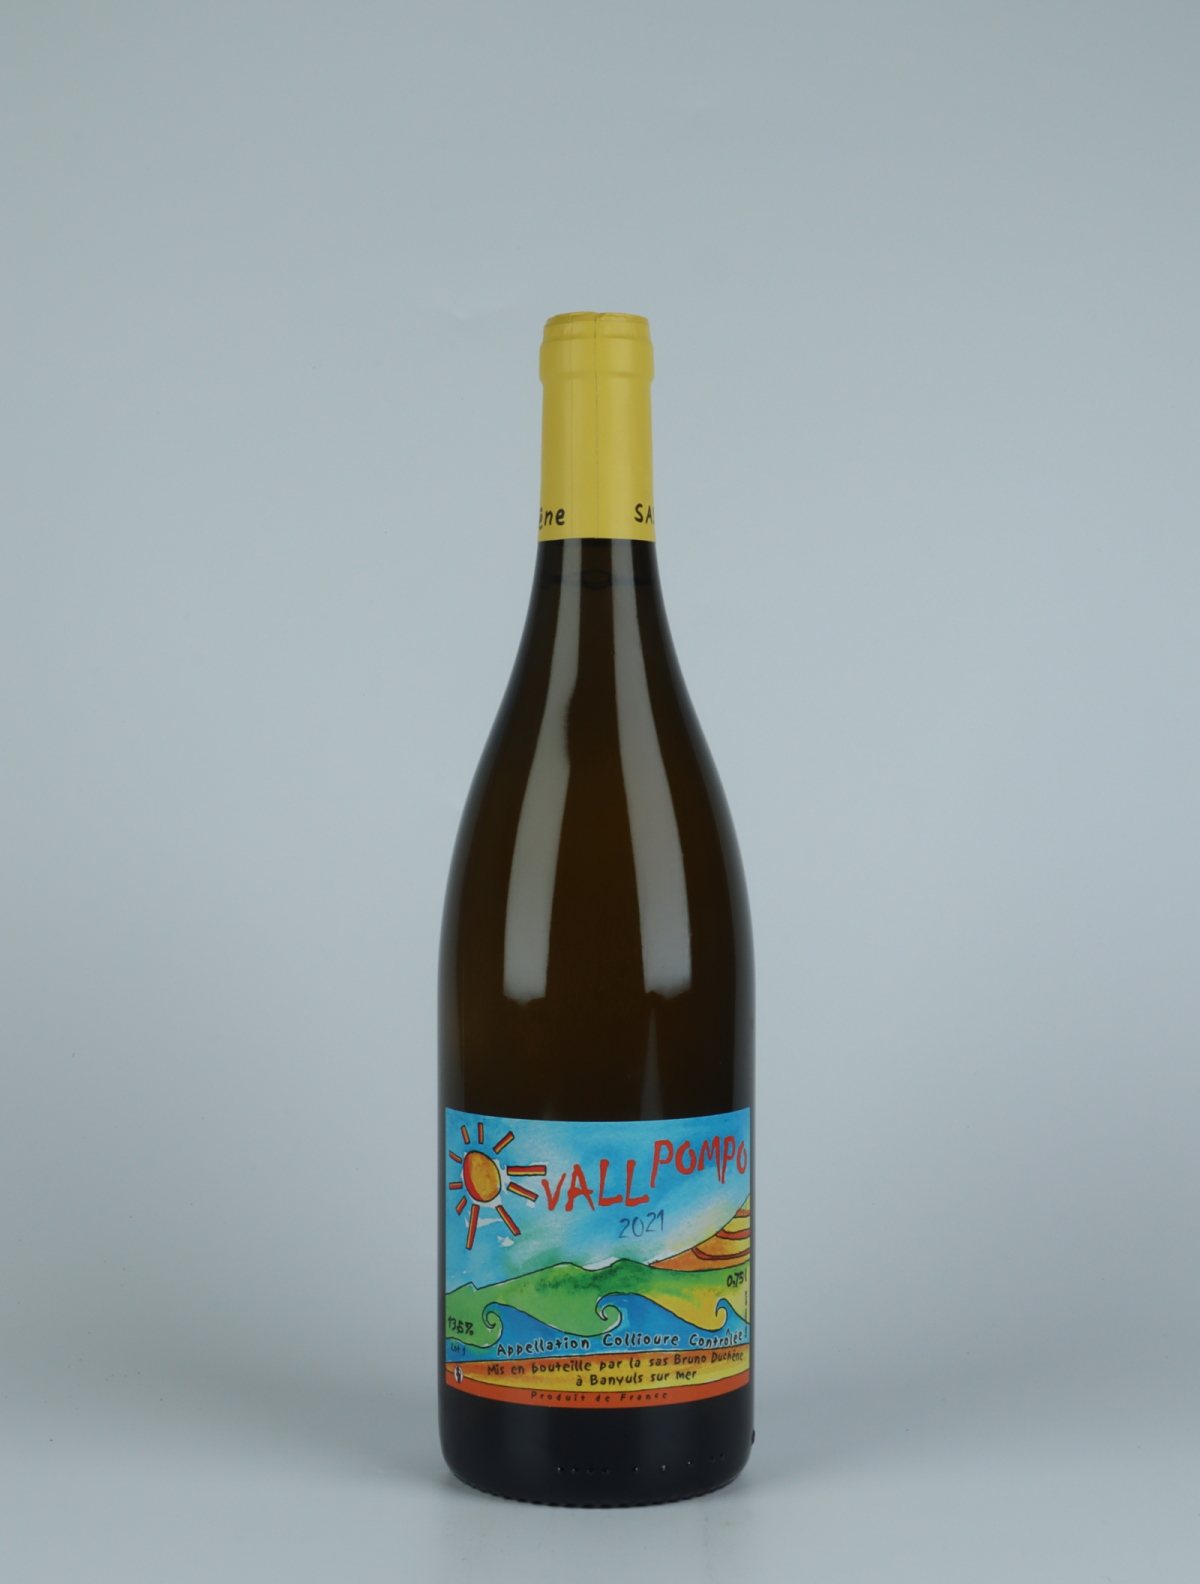 A bottle 2021 Vall Pompo White wine from Bruno Duchêne, Rousillon in France